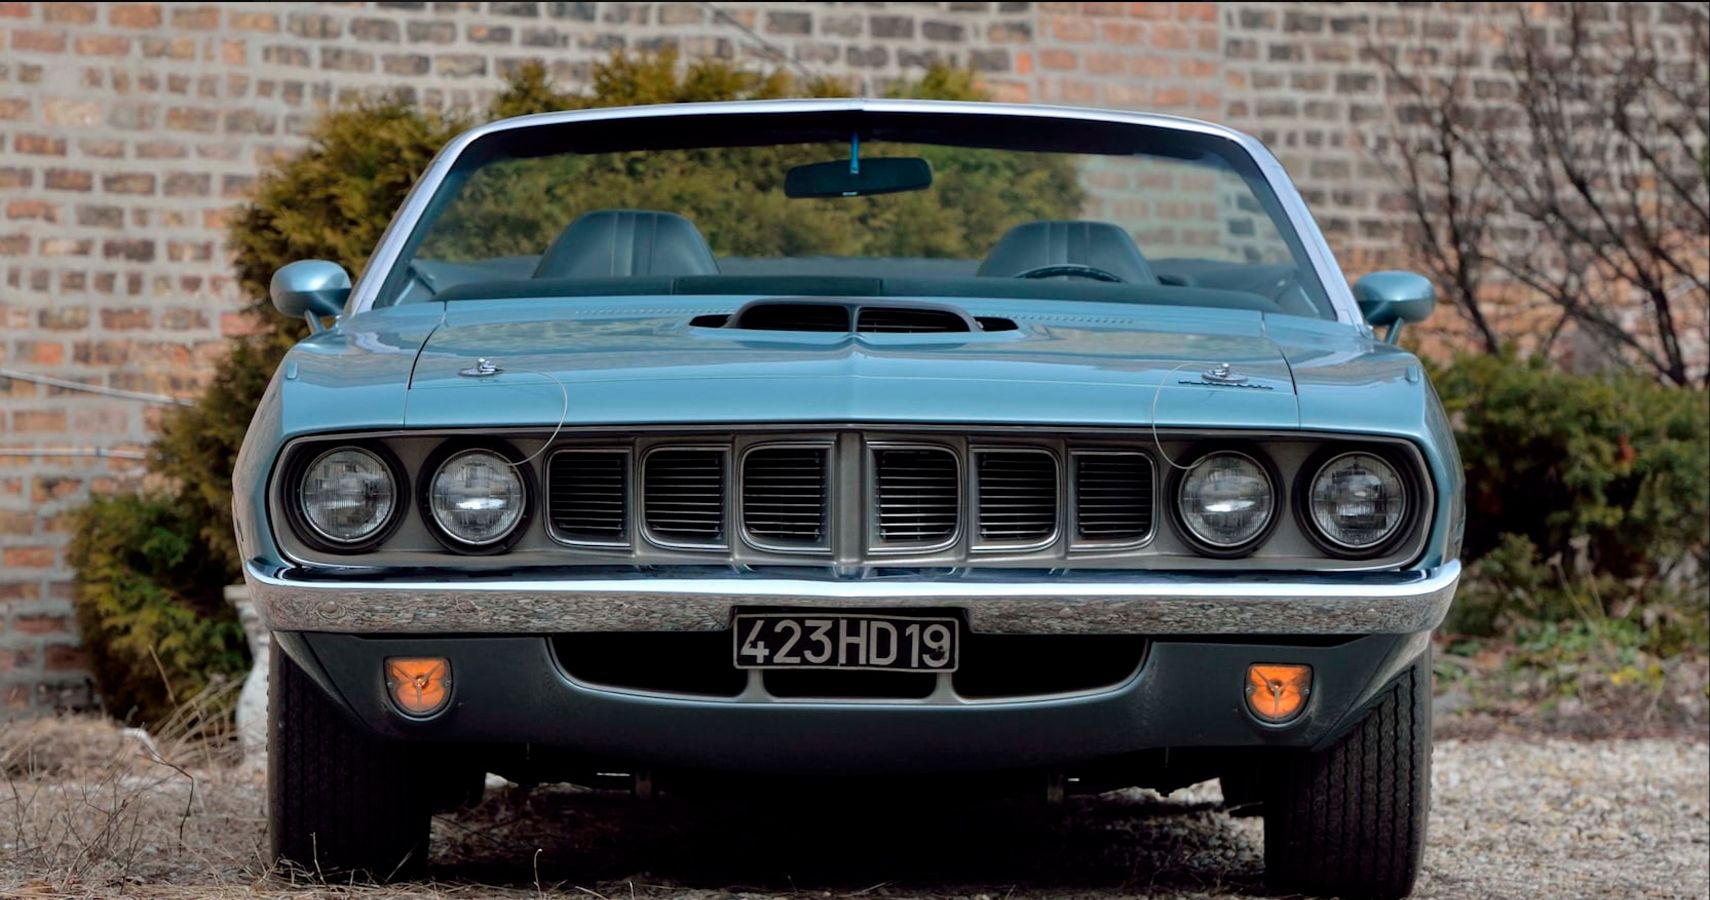 Plymouth 1971 Barracuda front view